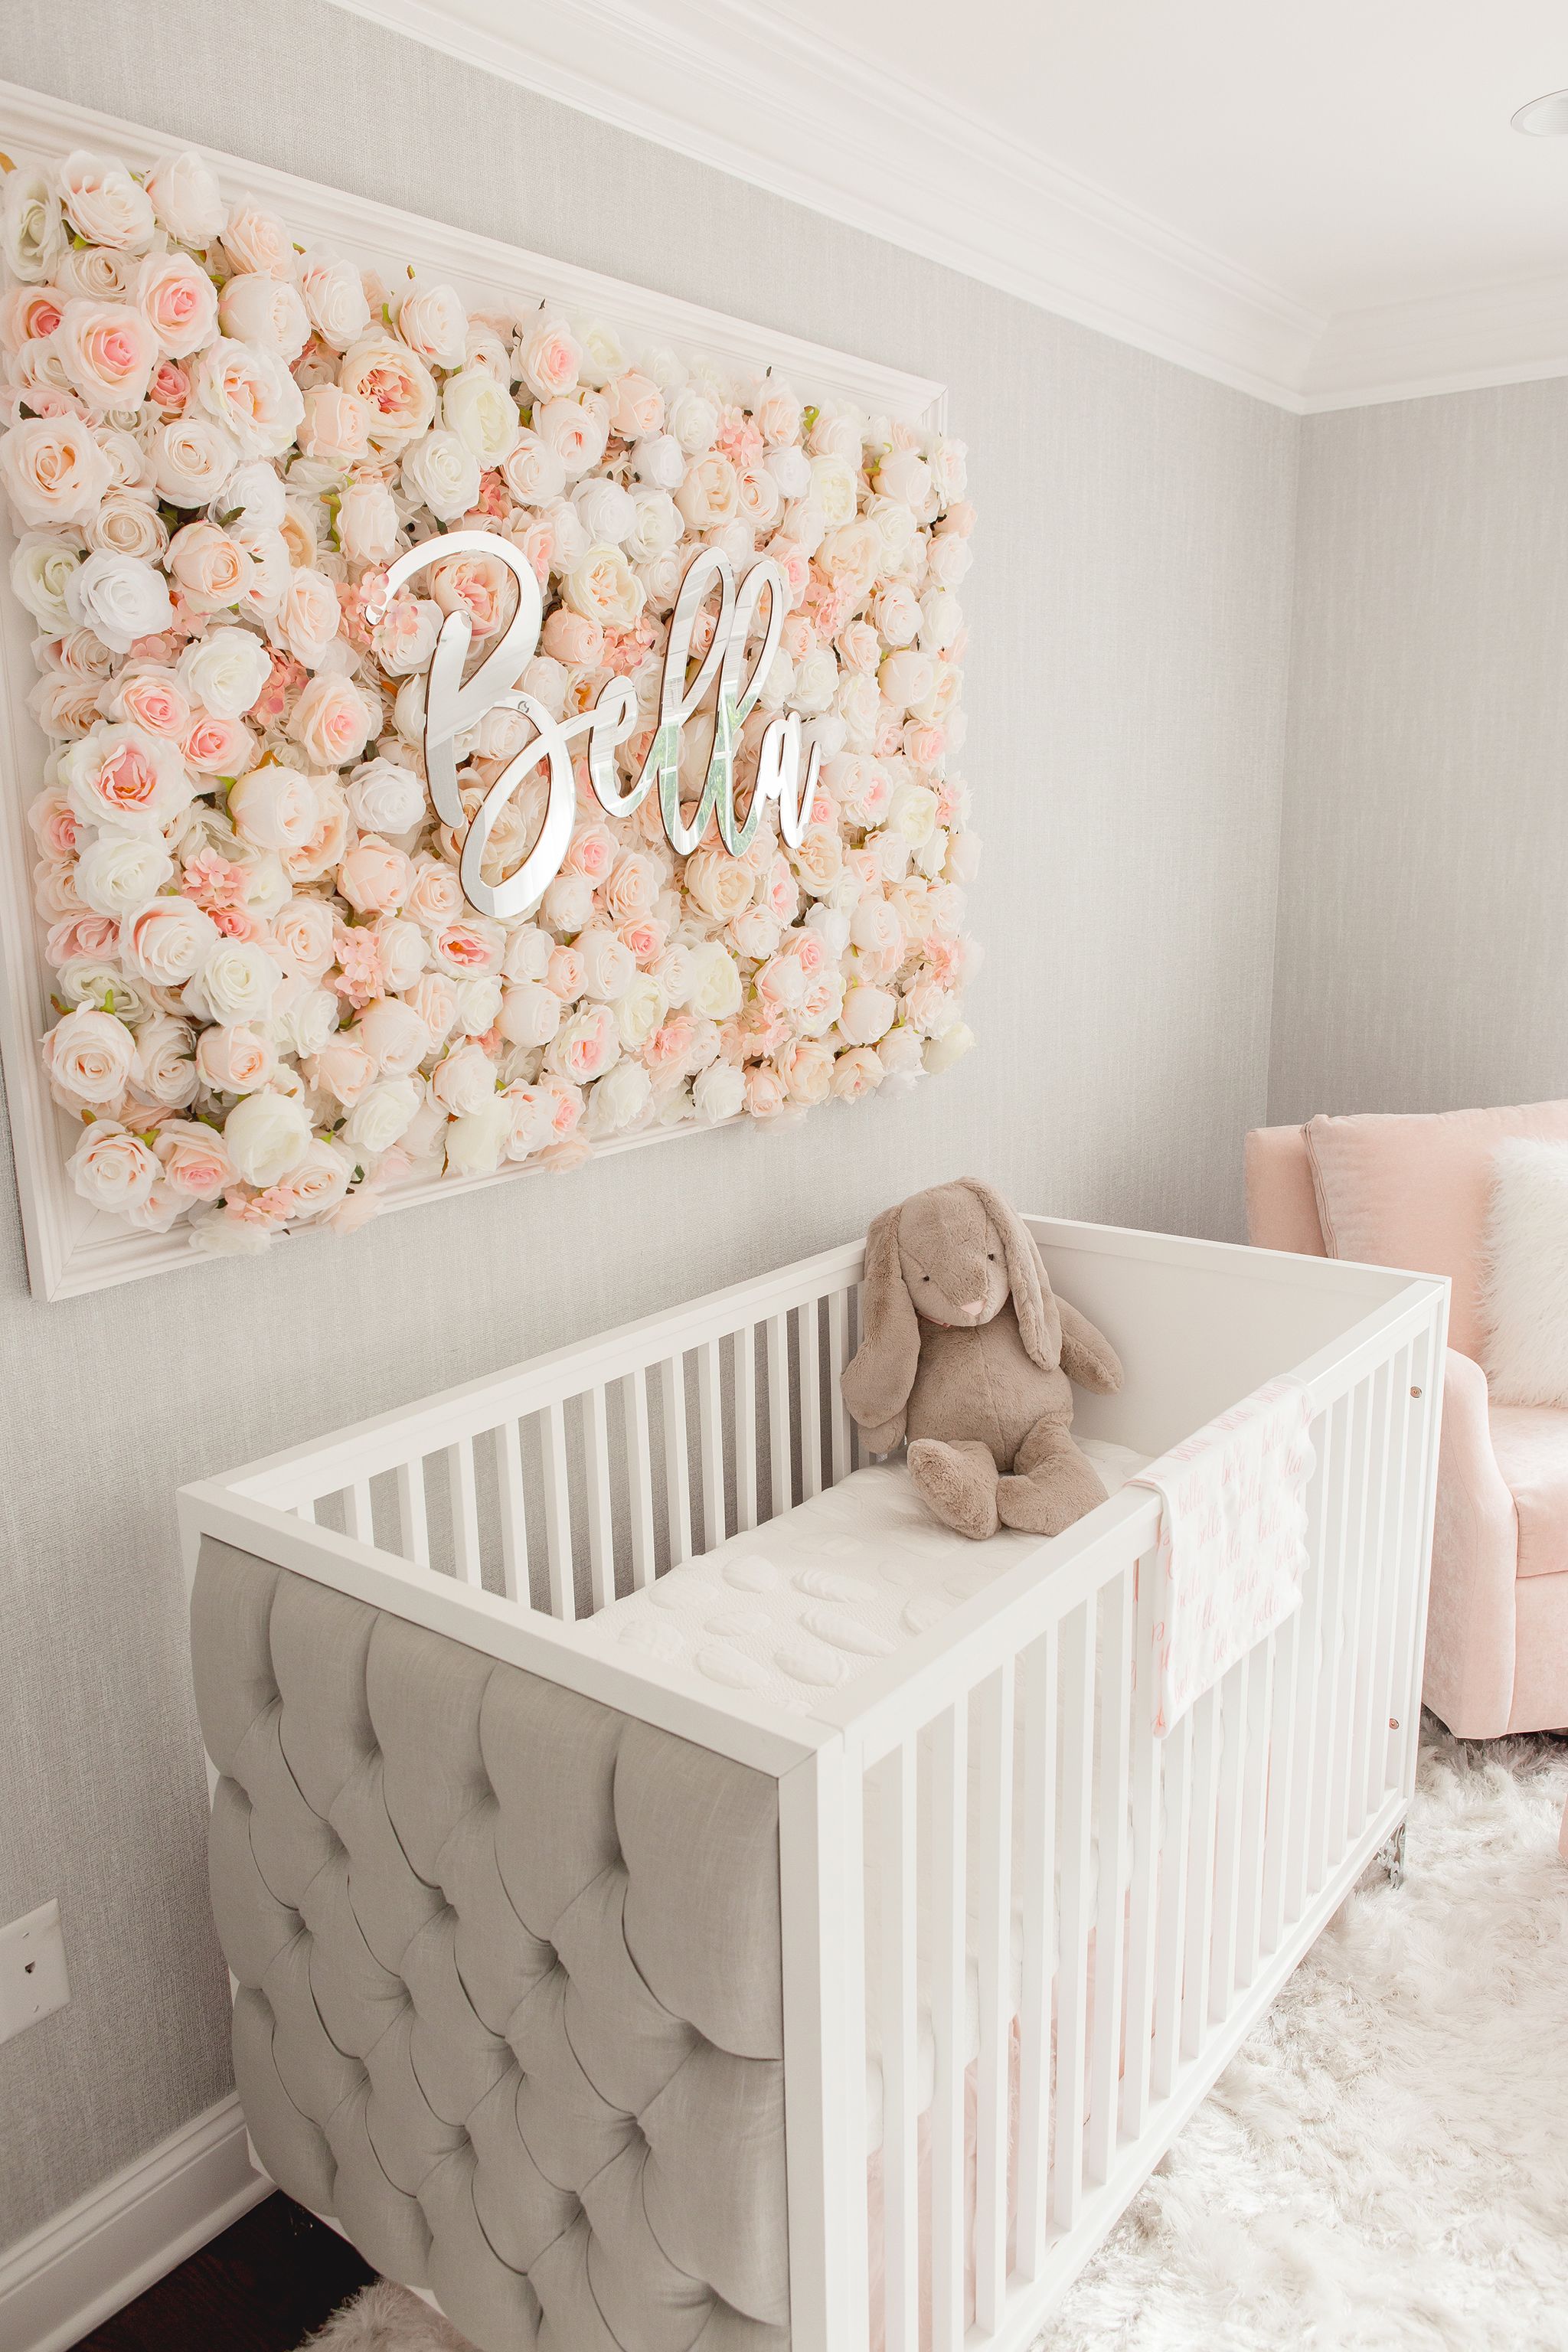 Guess Which Celebrity Nursery Inspired this Gorgeous Space - Project Nursery